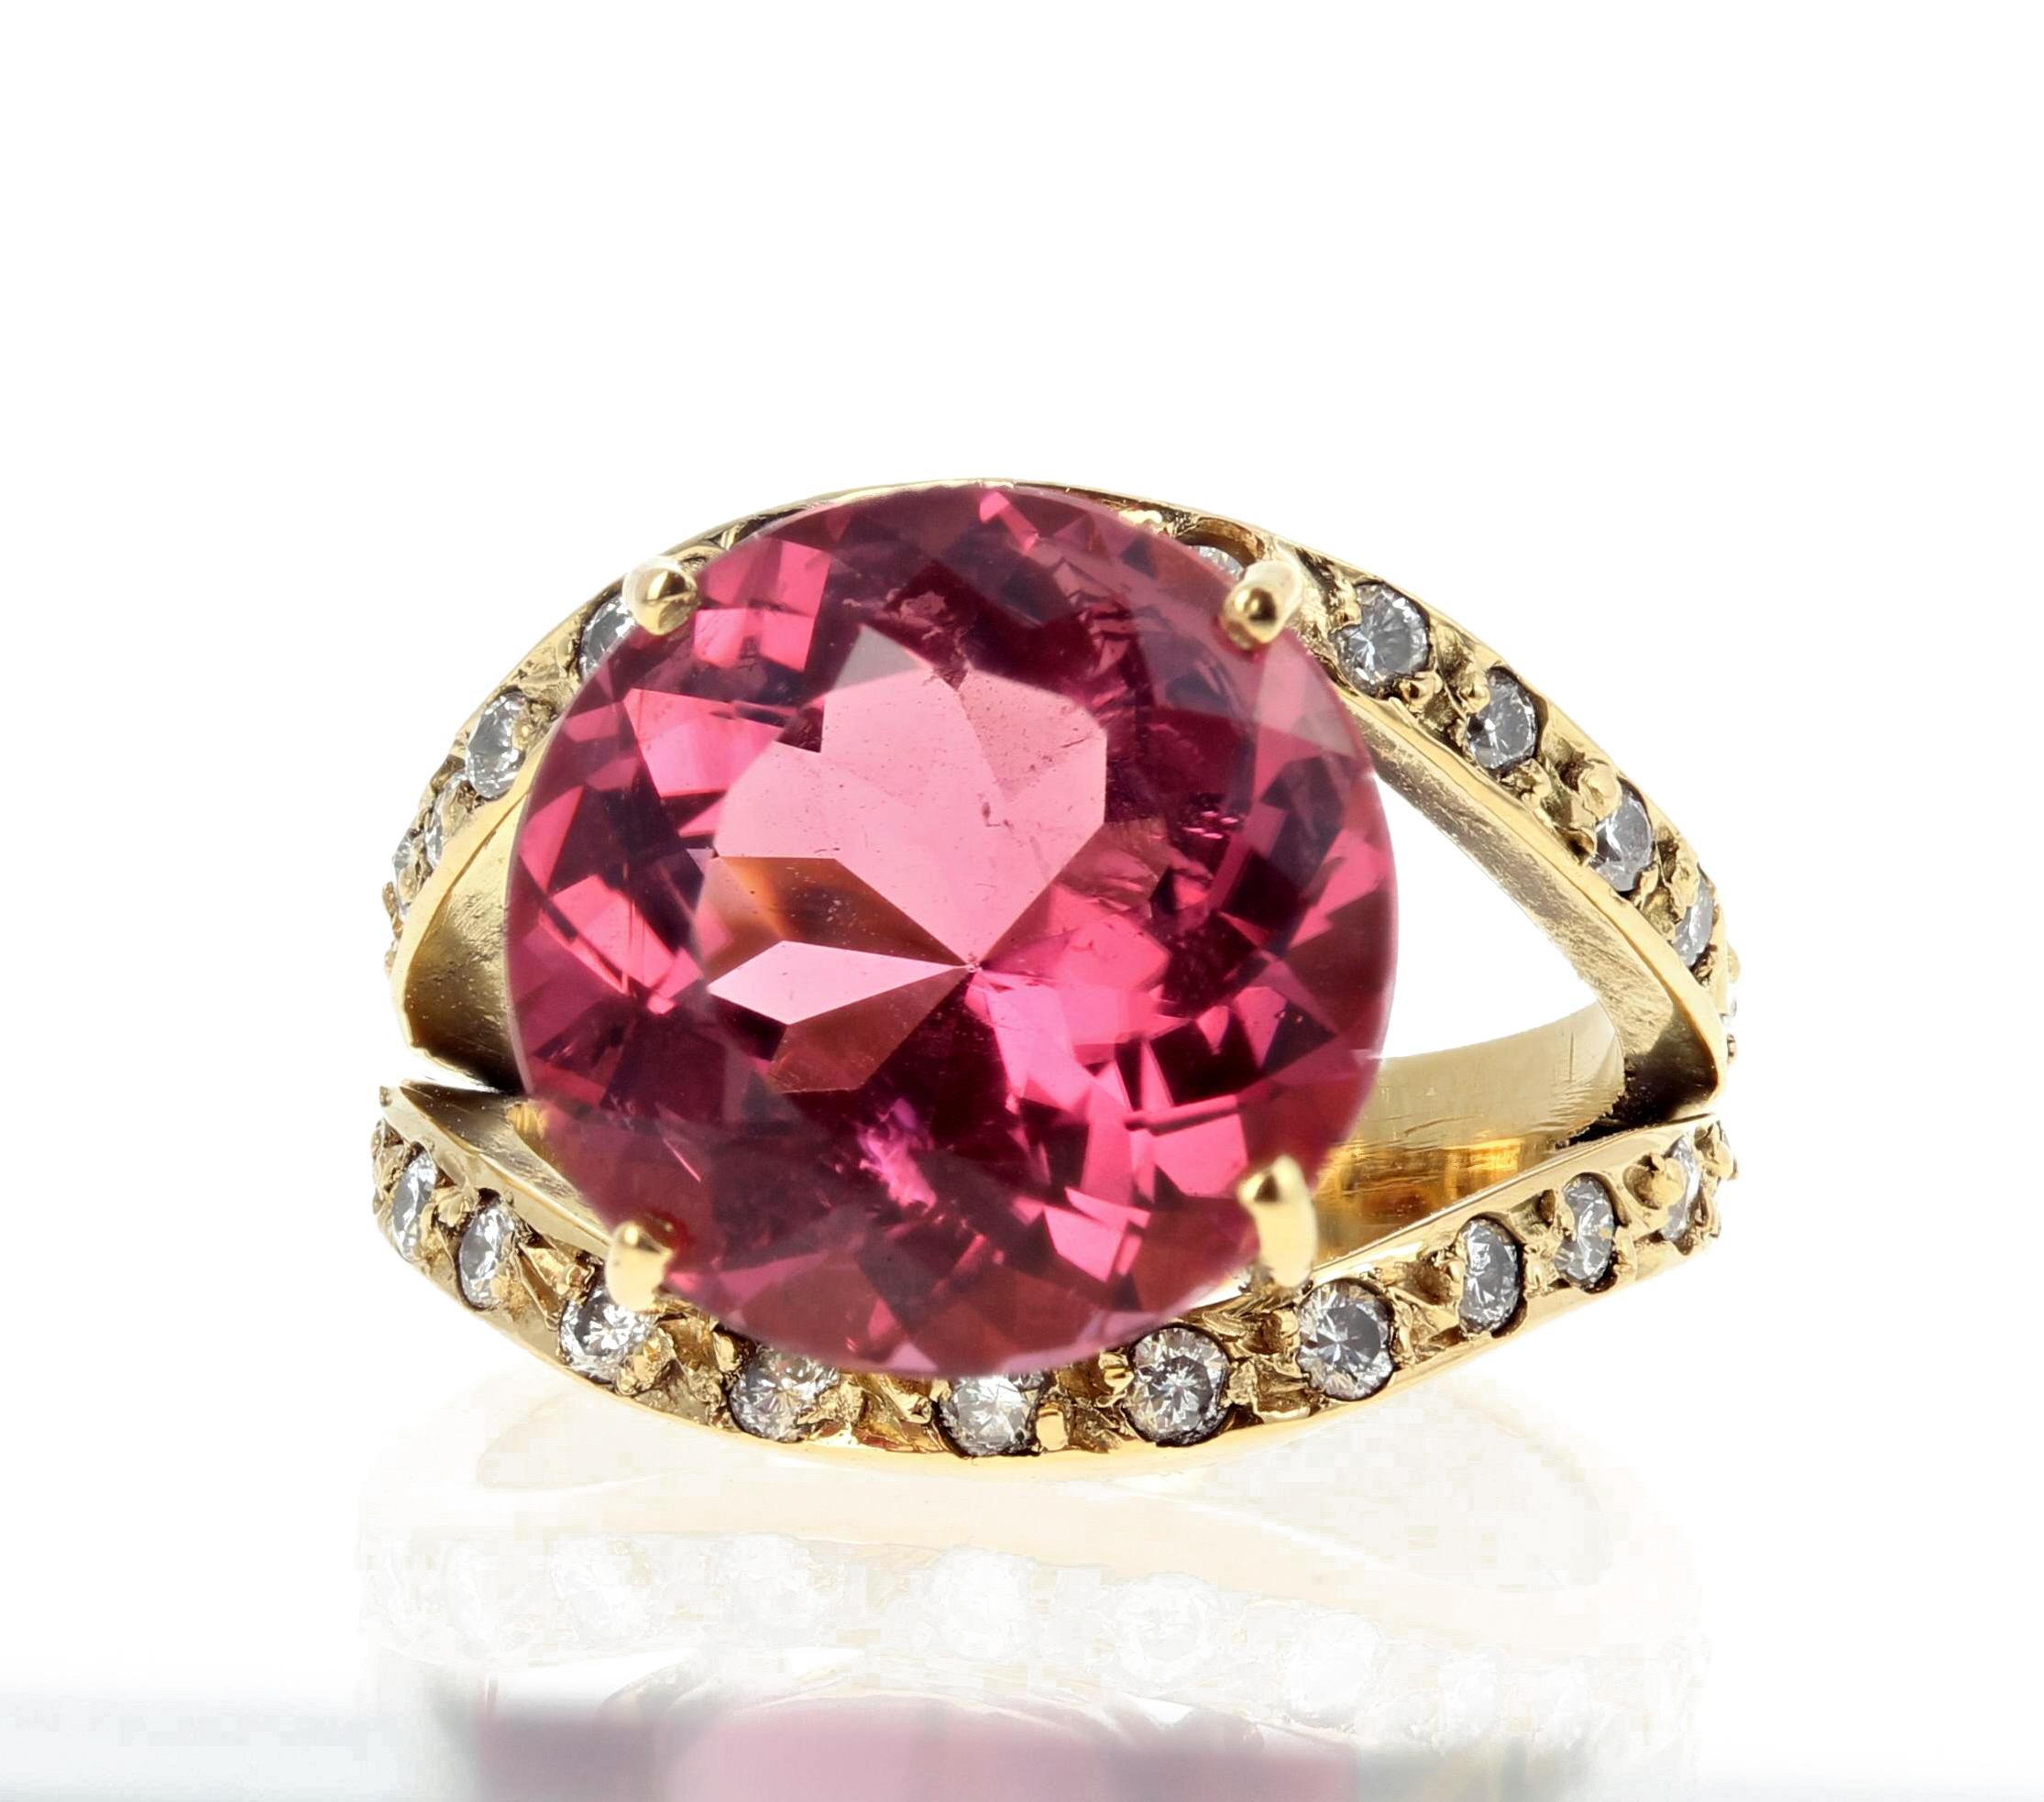 AJD Gorgeous Glittering  8.36 Ct Tourmaline & Diamonds 18 Kt Yellow Gold Ring In New Condition For Sale In Raleigh, NC